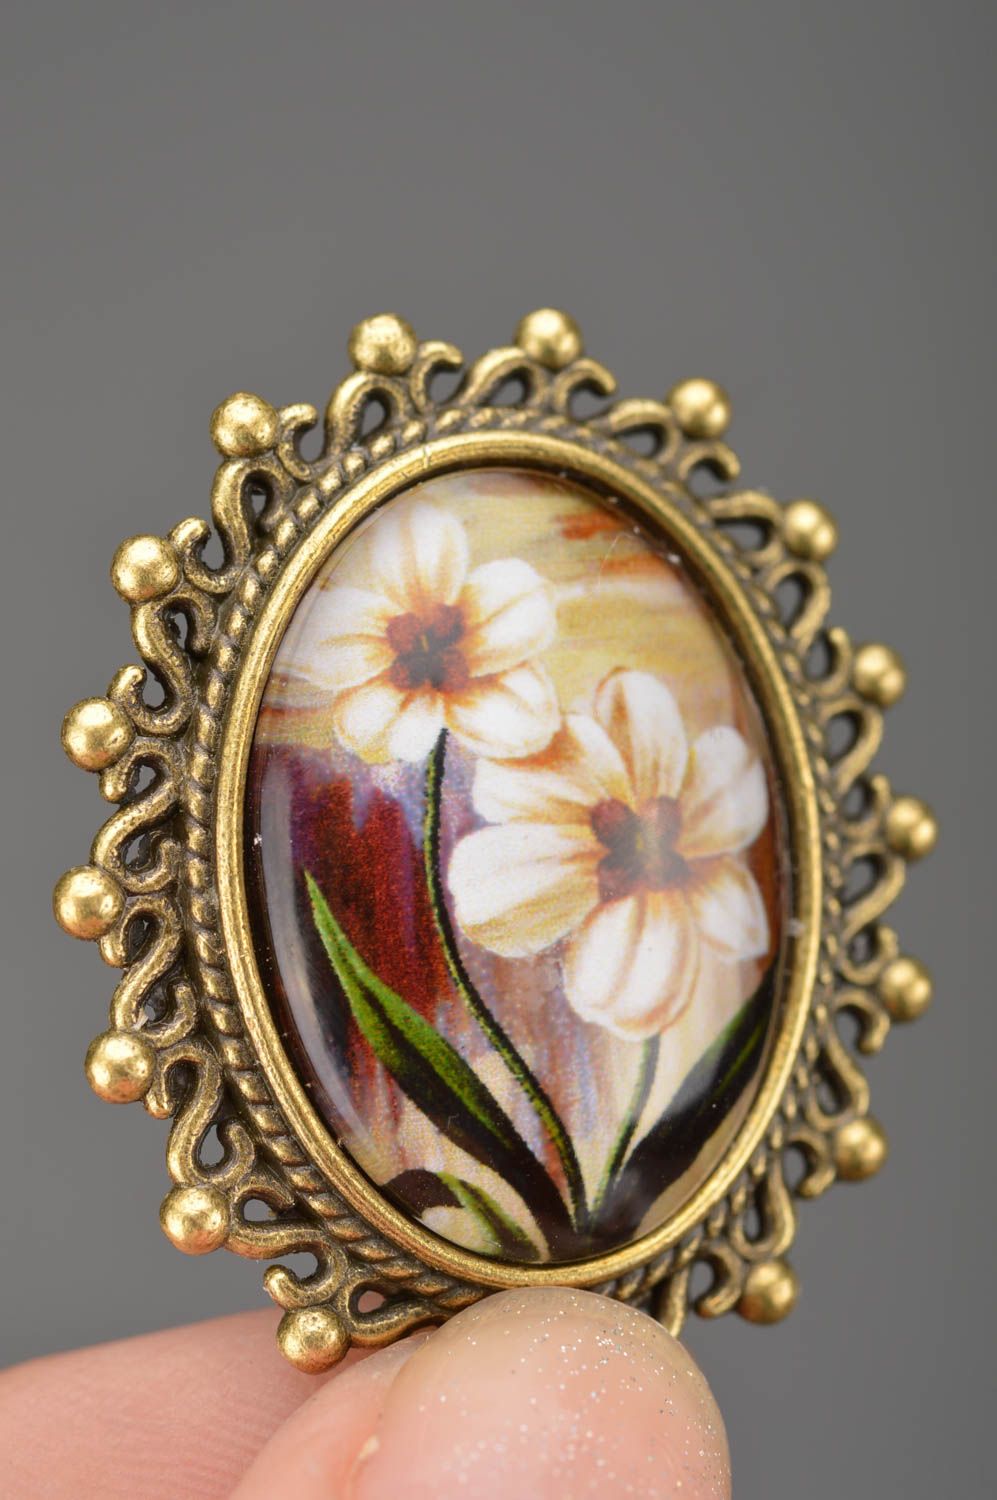 Handmade beautiful oval brooch in vintage style with flowers in dark shades photo 2